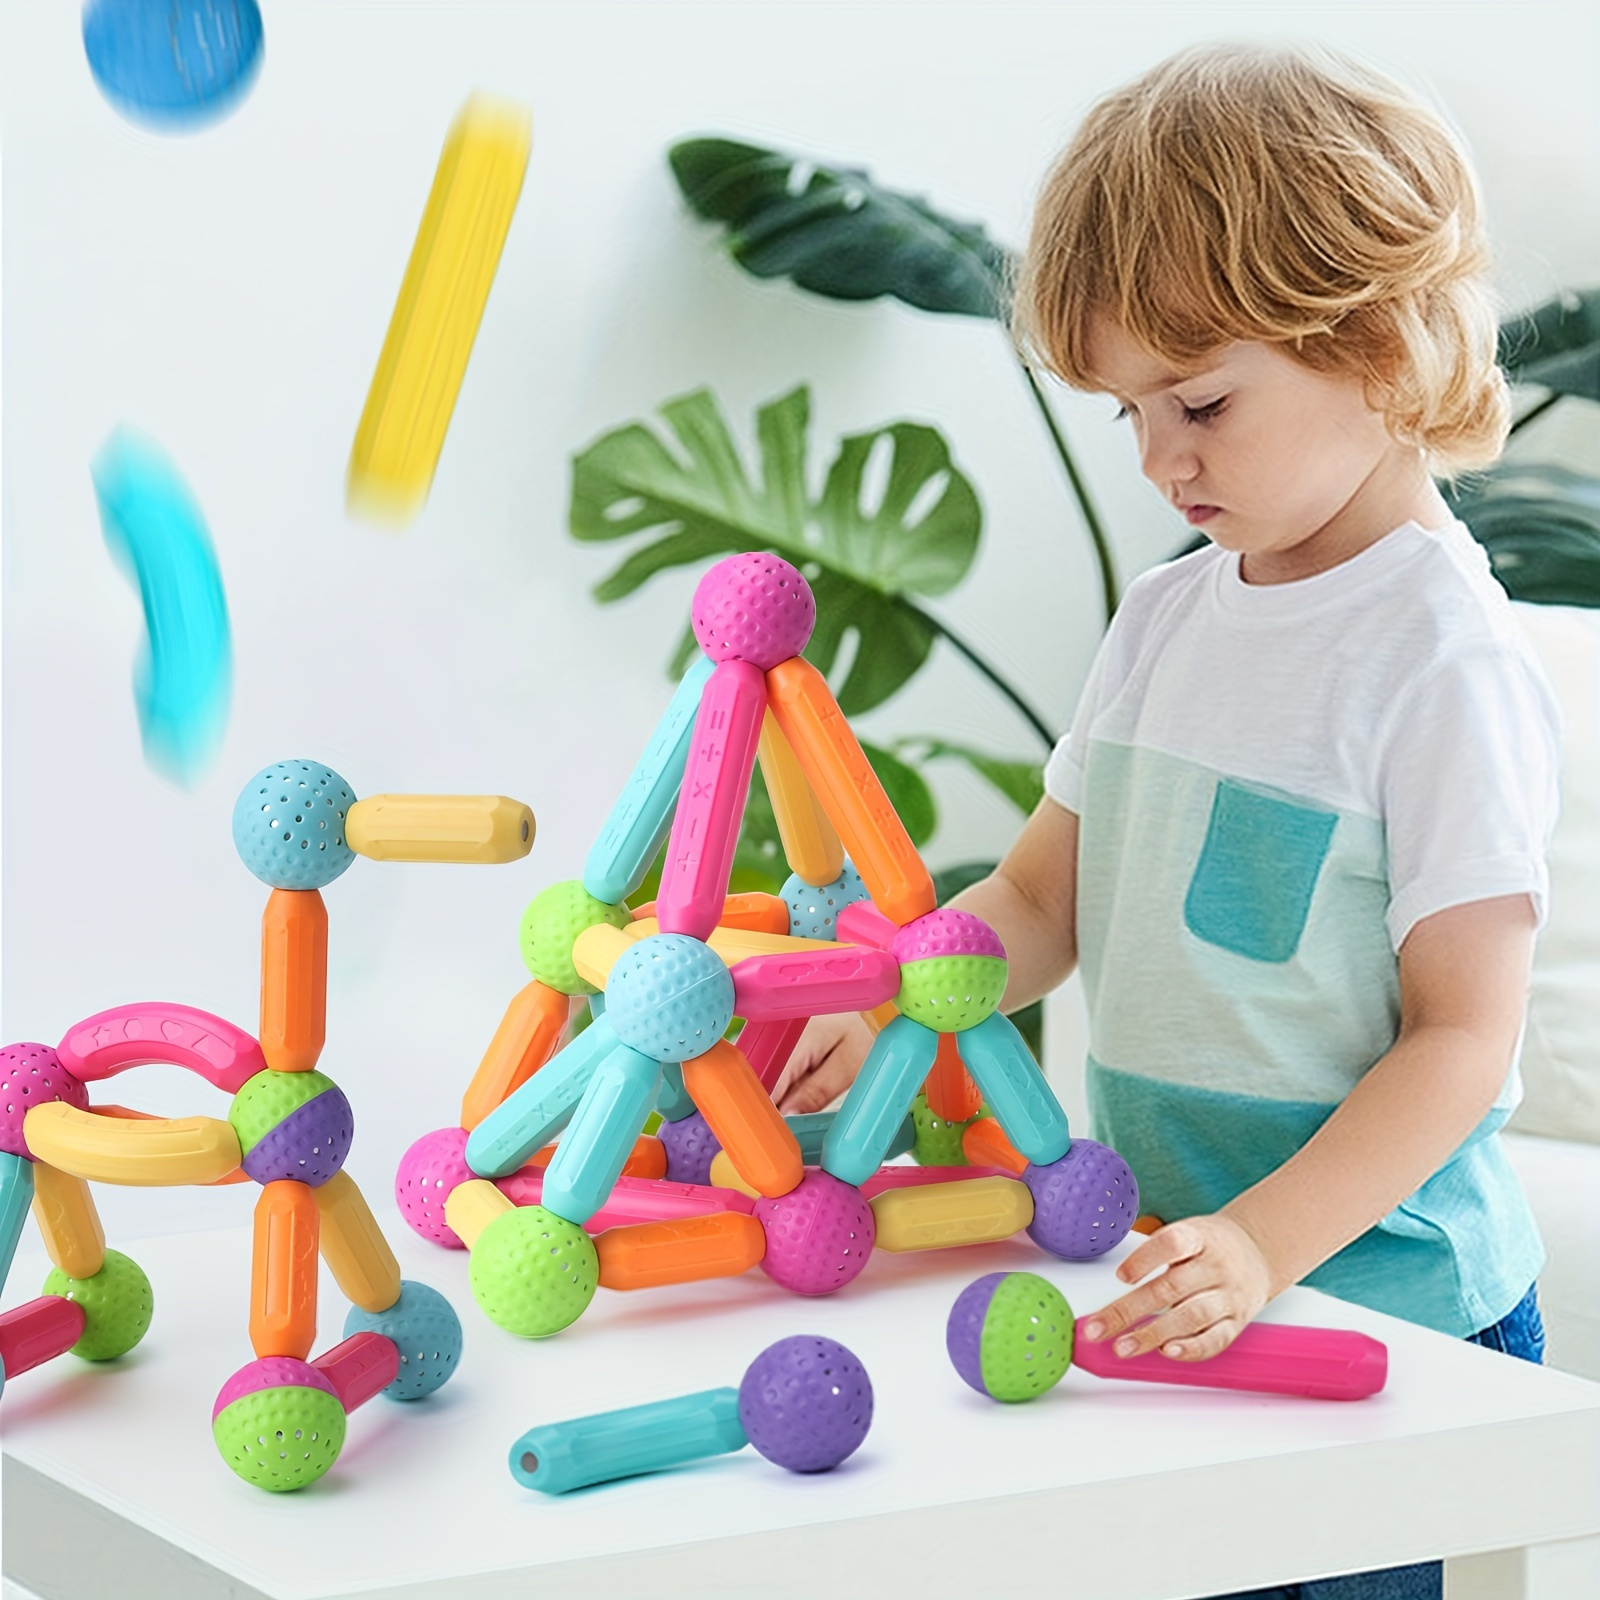 Maze Puzzle Toys for Baby, Training Concentration, Brinquedos